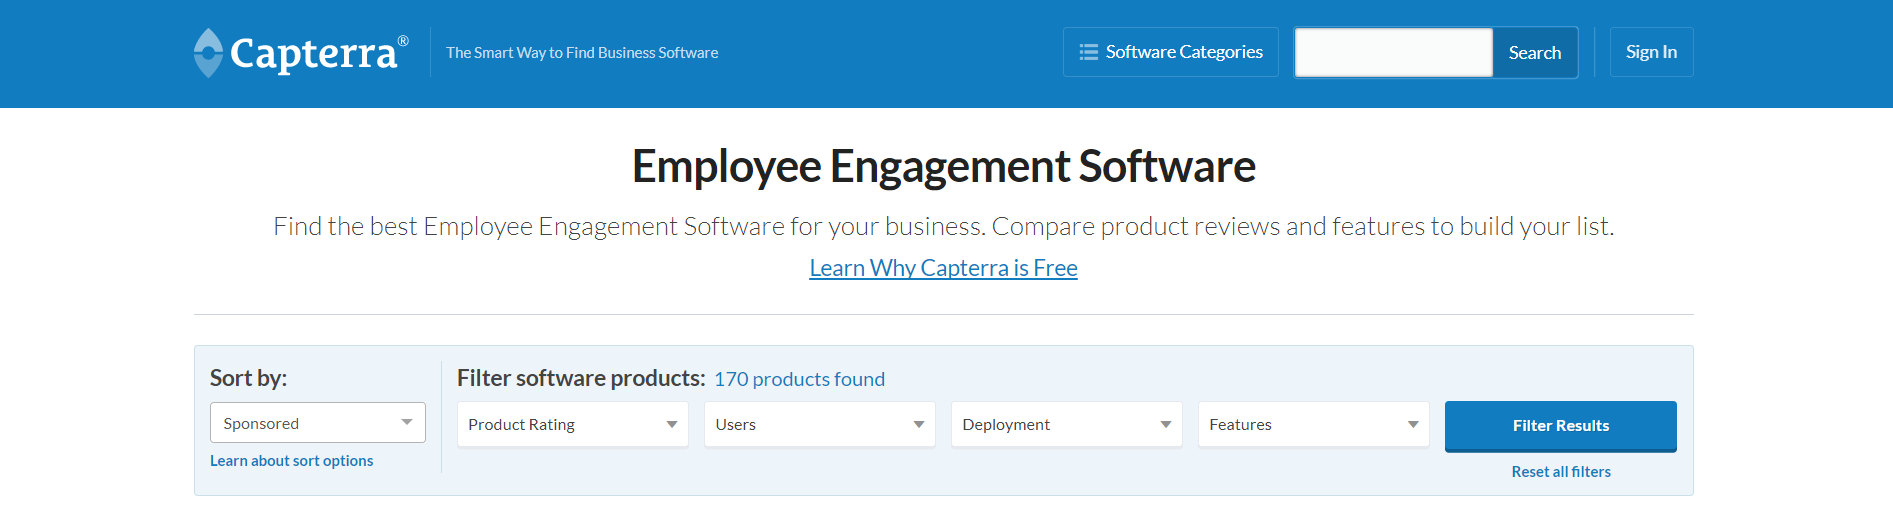 How to get more employee engagement software sales leads from Capterra